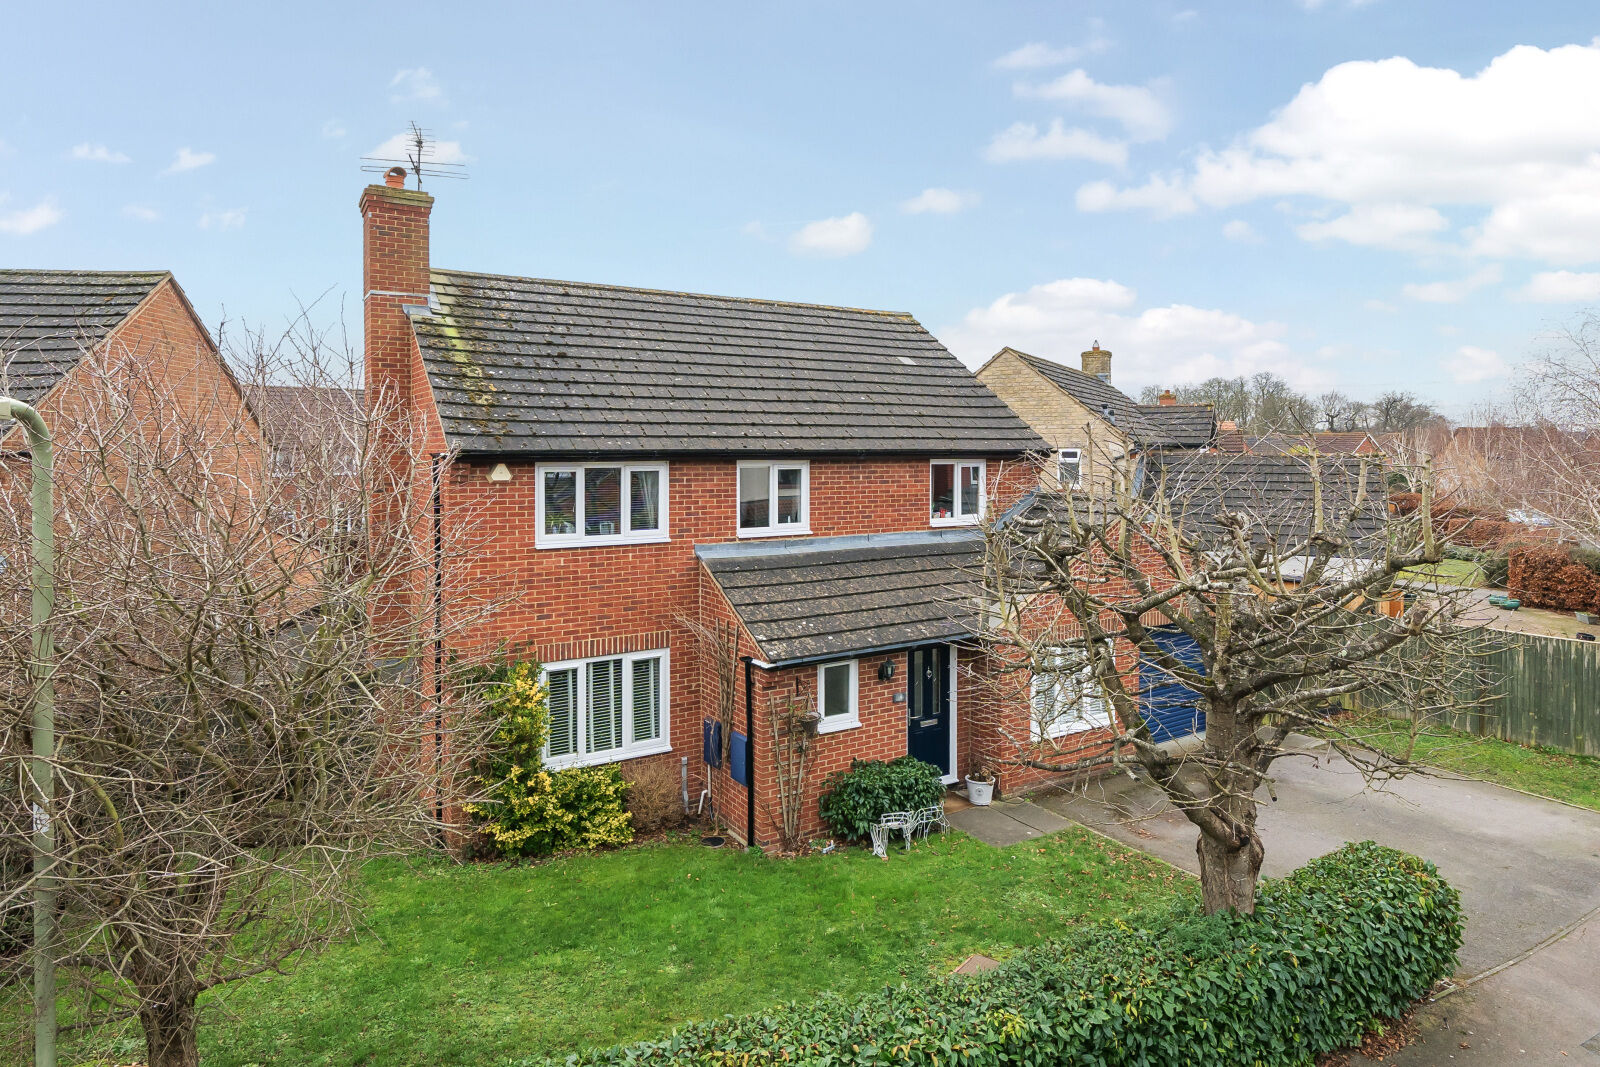 4 bedroom detached house for sale Westwater Way, Didcot, OX11, main image